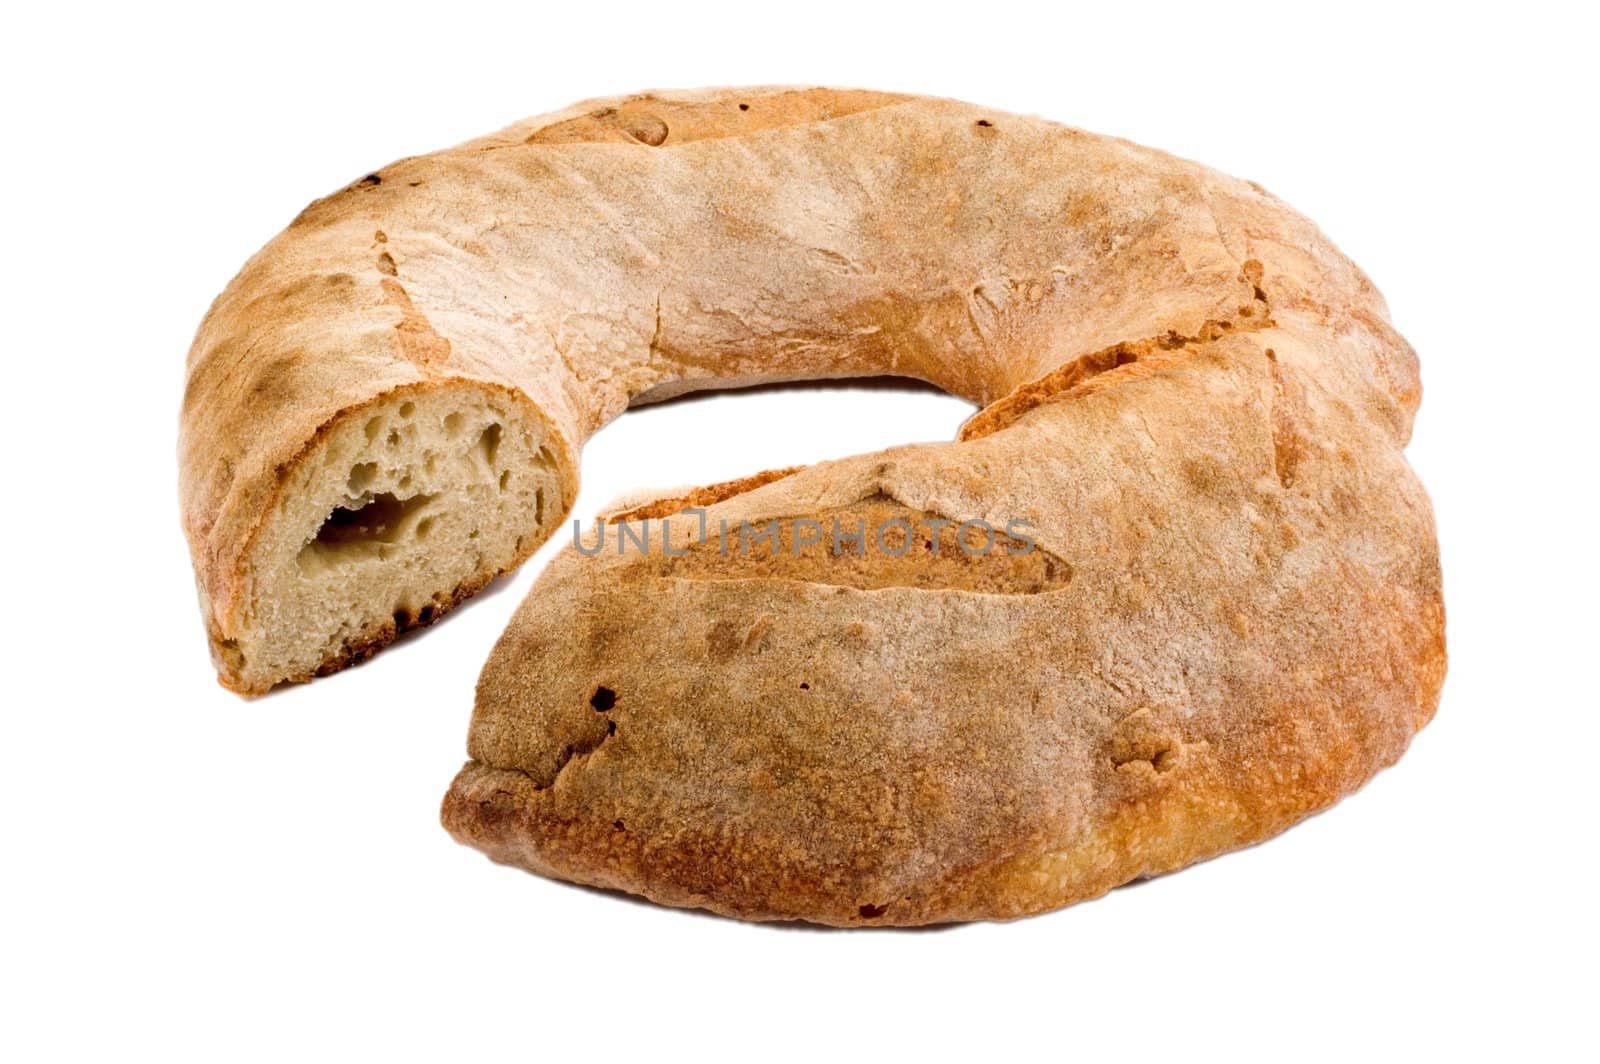 Ring-shaped Italian bread loaf isolated on white